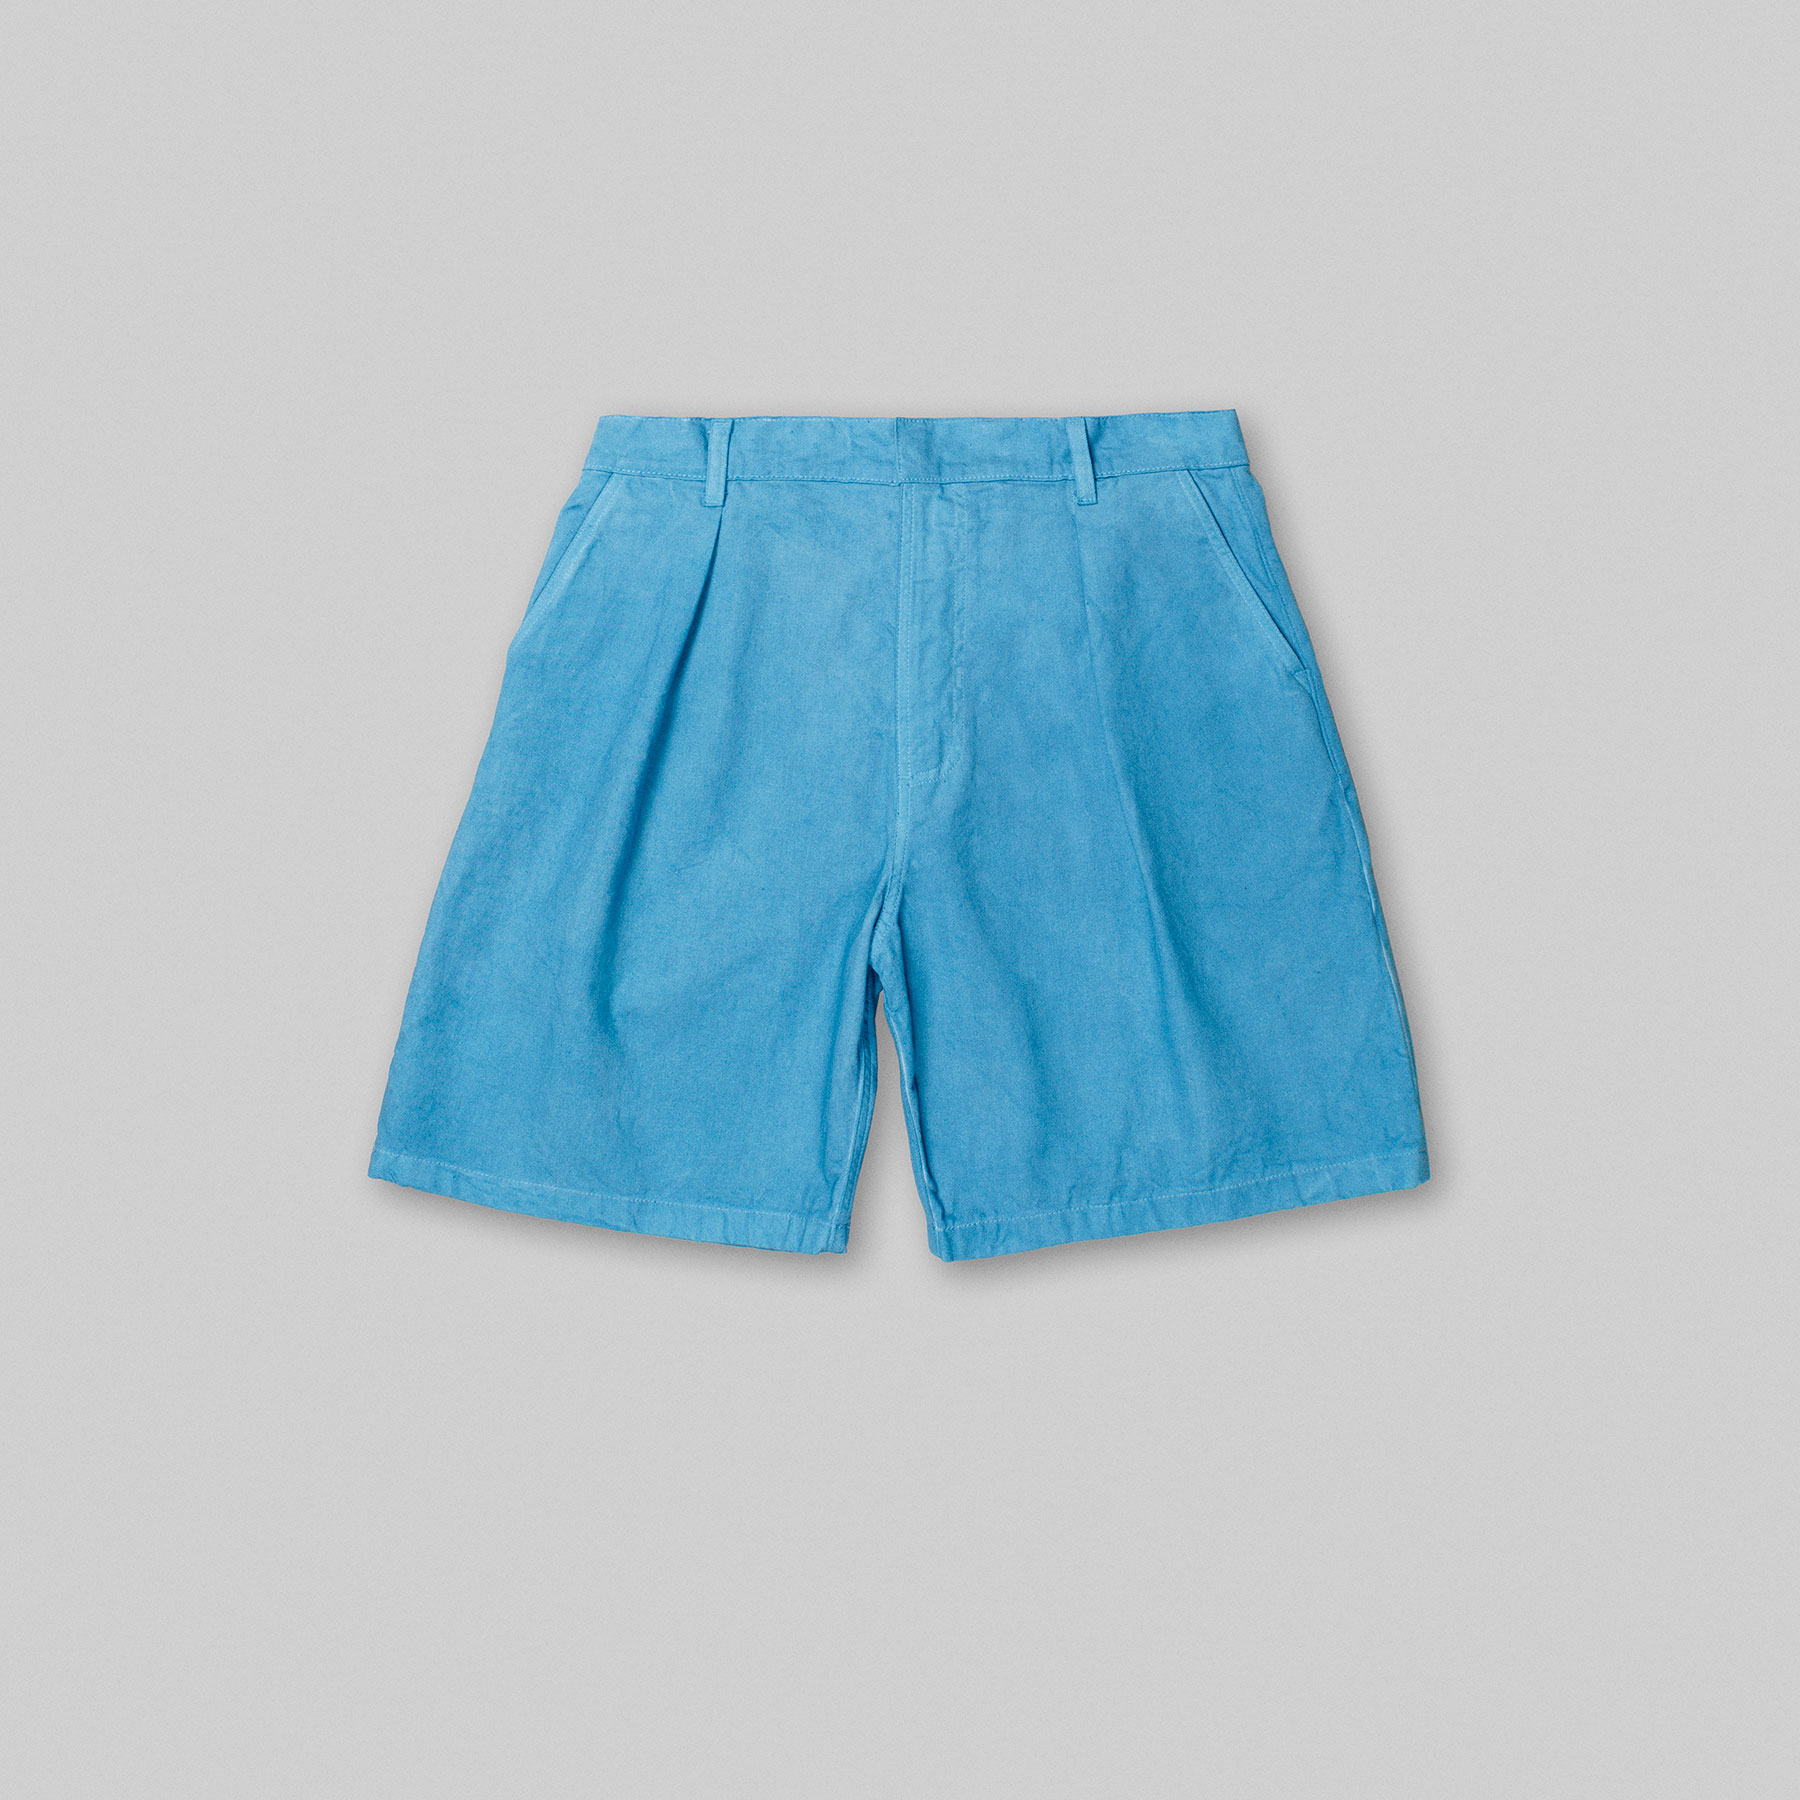 PAGE shorts by Arpenteur in Ice woad color